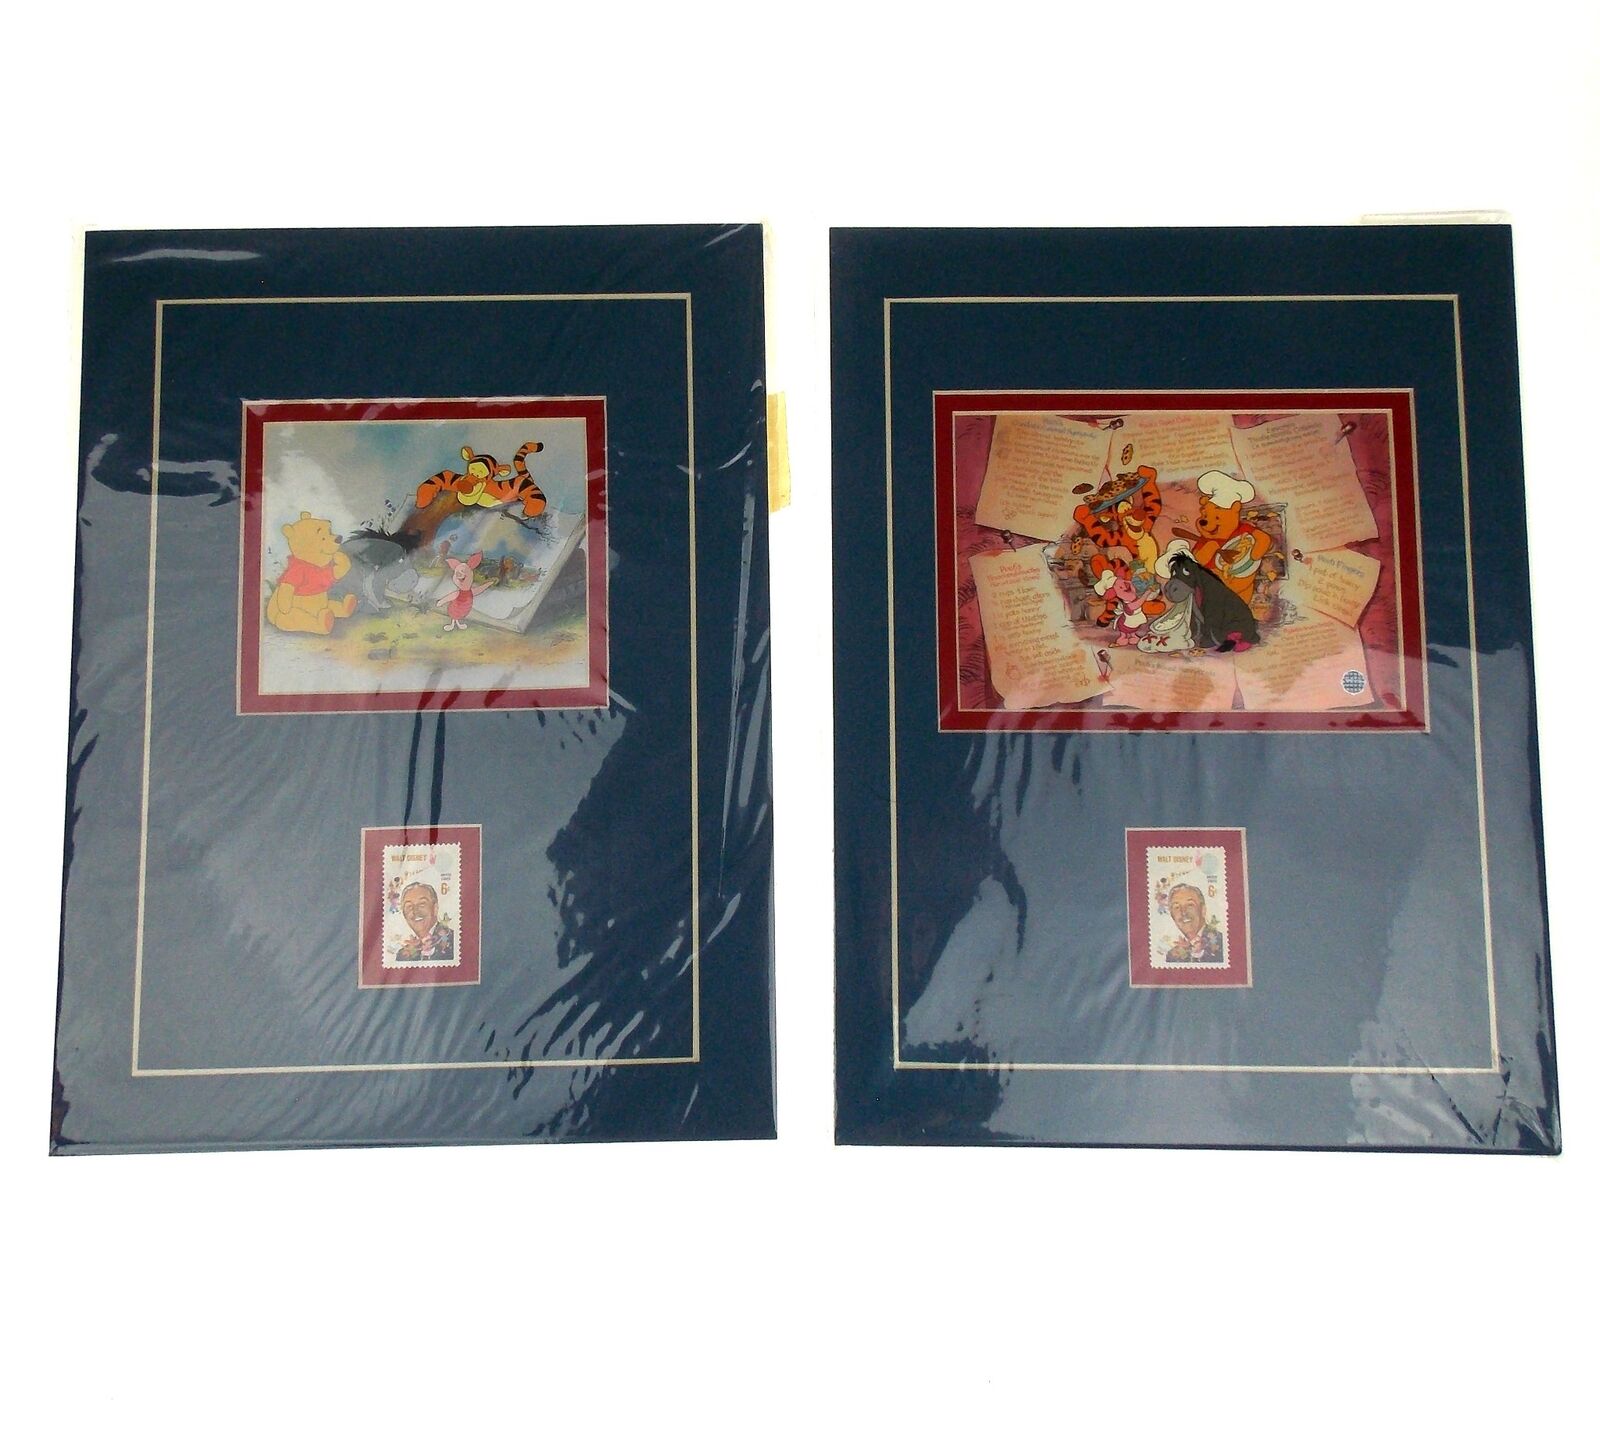 Walt Disney 6 Cent USA Stamps Mounted Winnie The Pooh Images Matted Set of 2 Без бренда